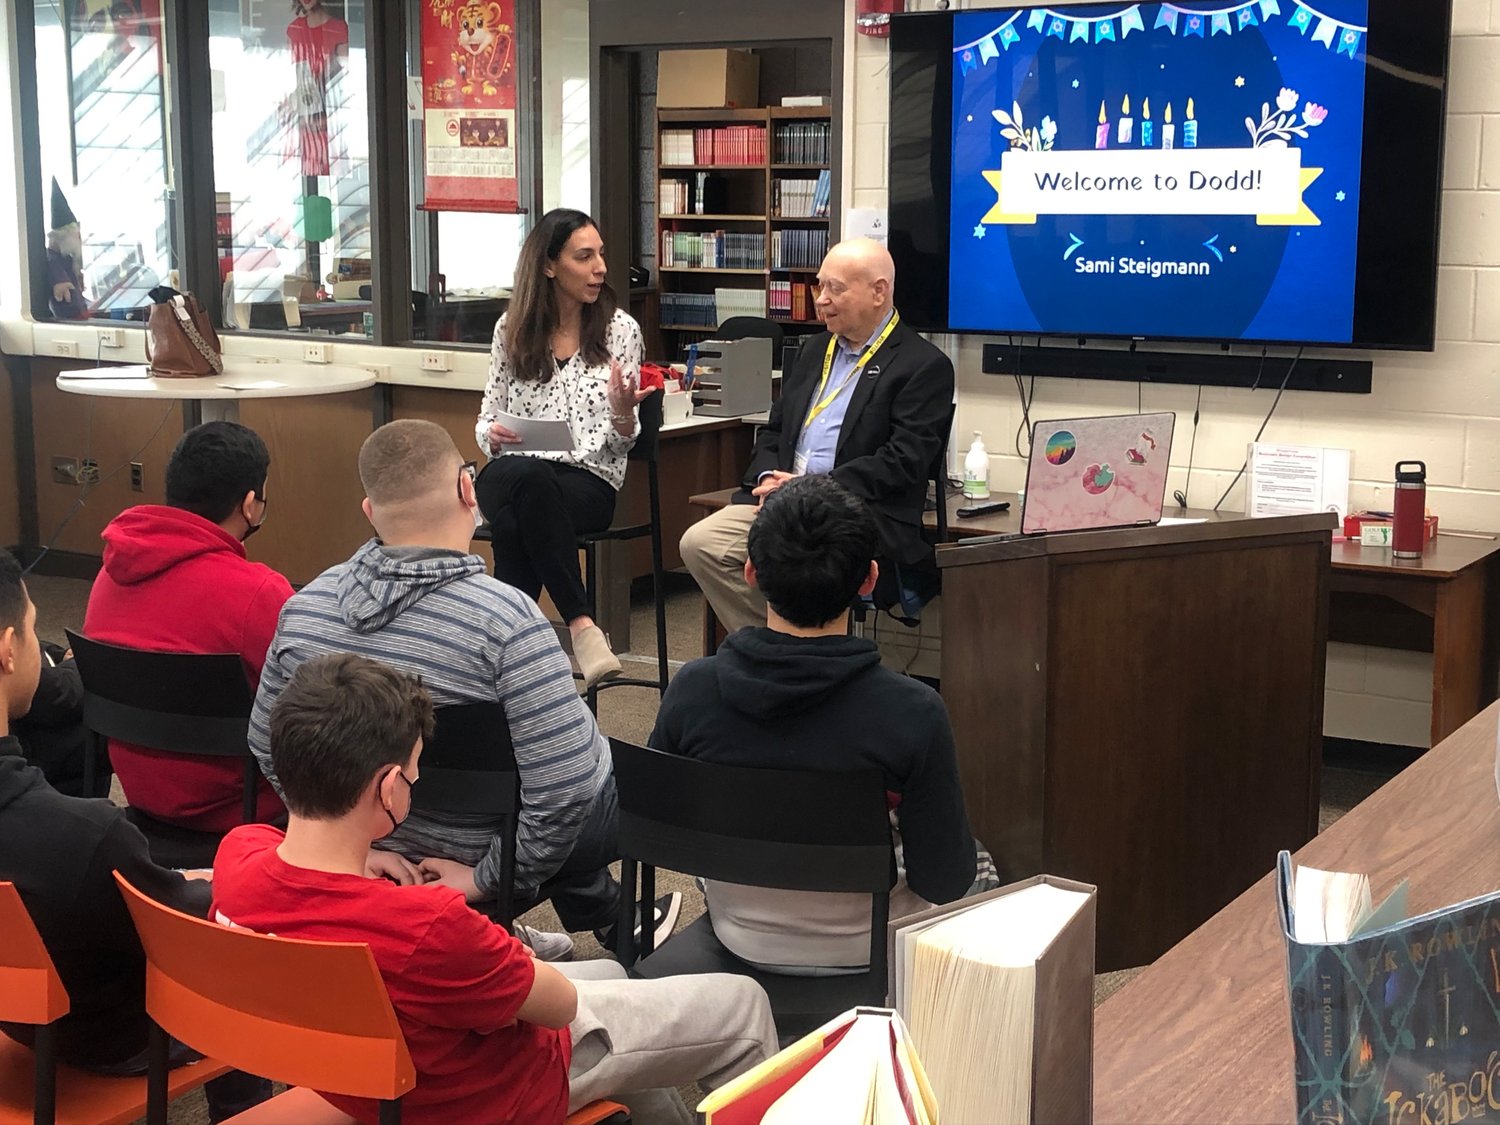 J.W. Dodd Middle School eighth grade students with Holocaust Survivor Sami Steigmann, who spoke to the students about his experience and the importance of standing up against injustice and prejudice.